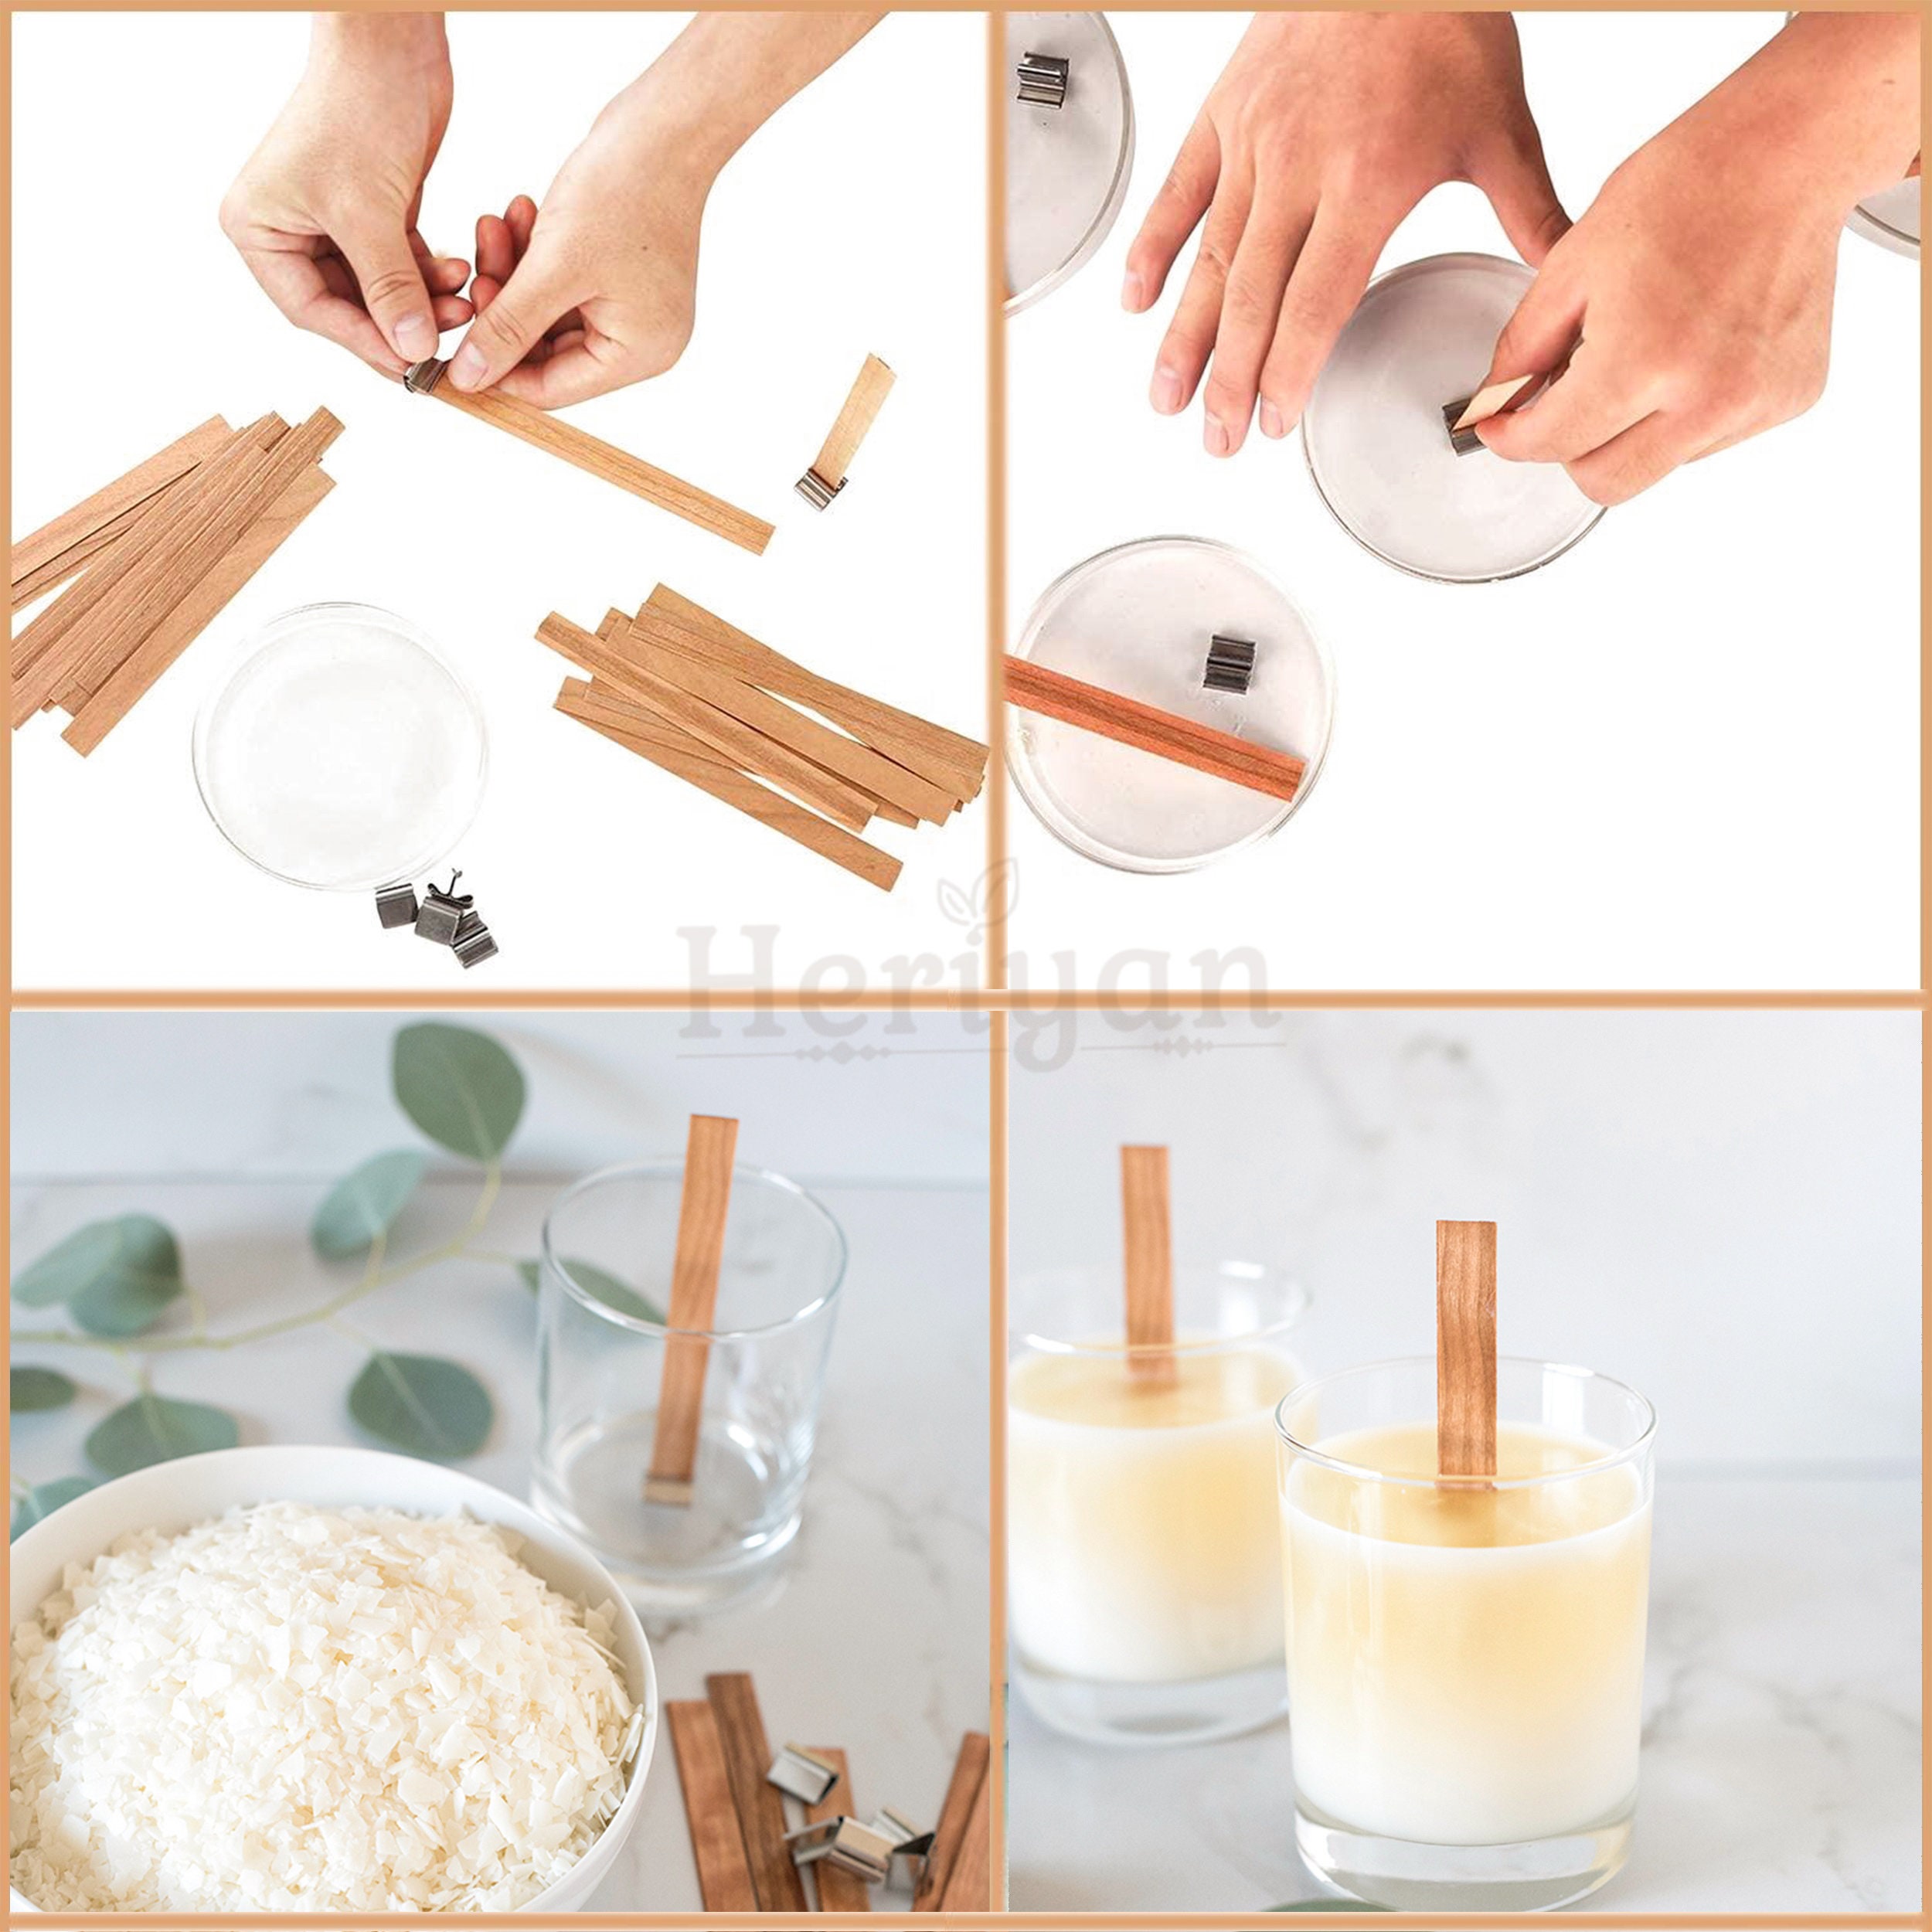 Cross Wooden Wick, Thickness of Wick: 1 Mm 0,03 In, Length 12 Cm 4.72 In,  Beech, Oak, Pine, Mixed Candle Making 